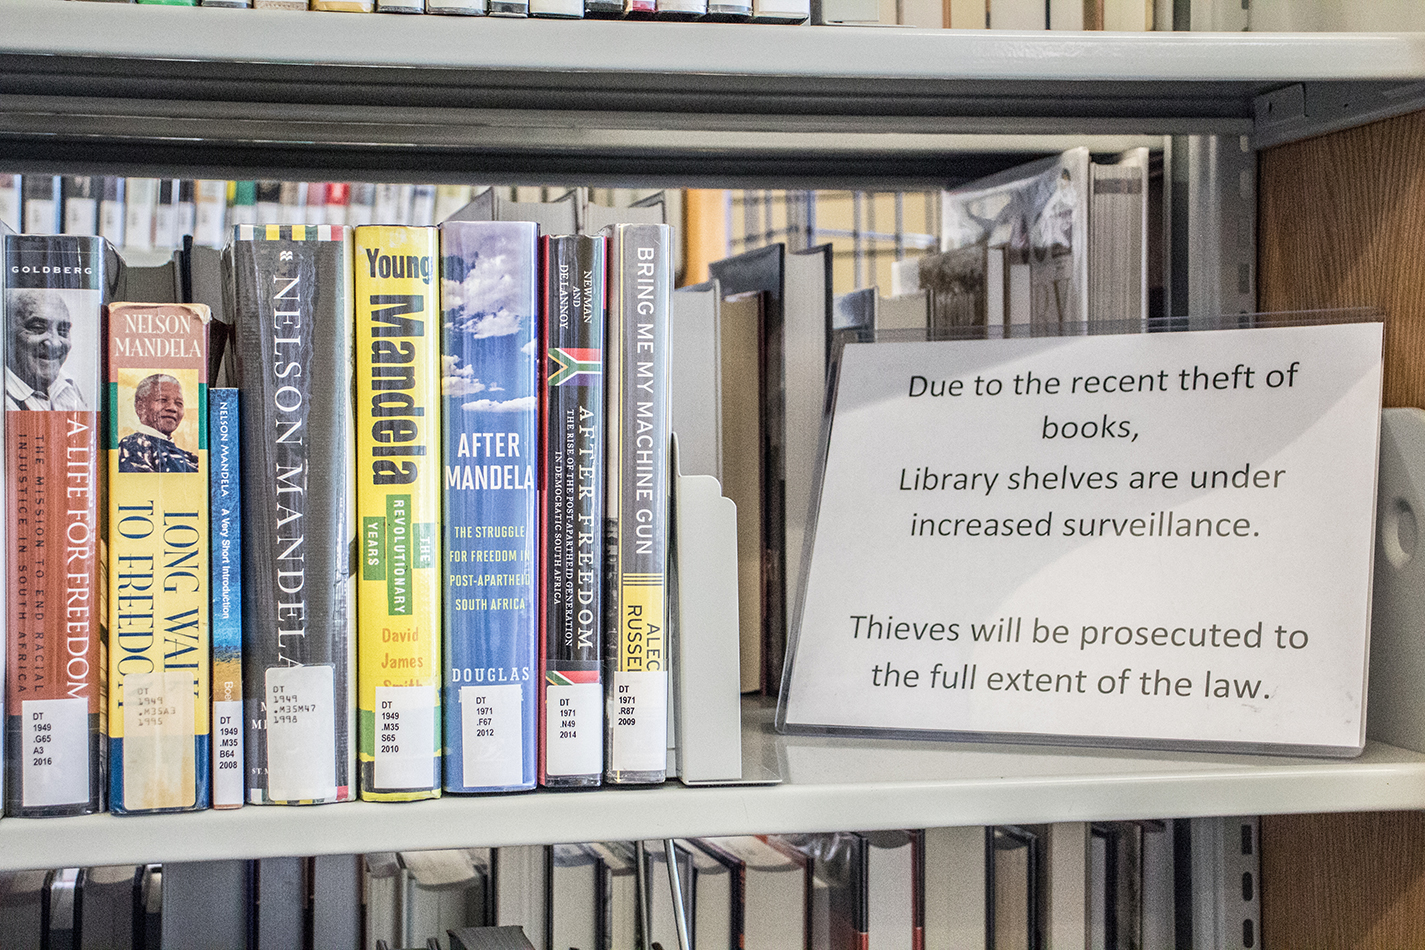 For the last two years, signs notifying students of camera surveillance sit on the bookshelves at SE Campus’ Judith Carrier Library. Campus police have access to the footage.